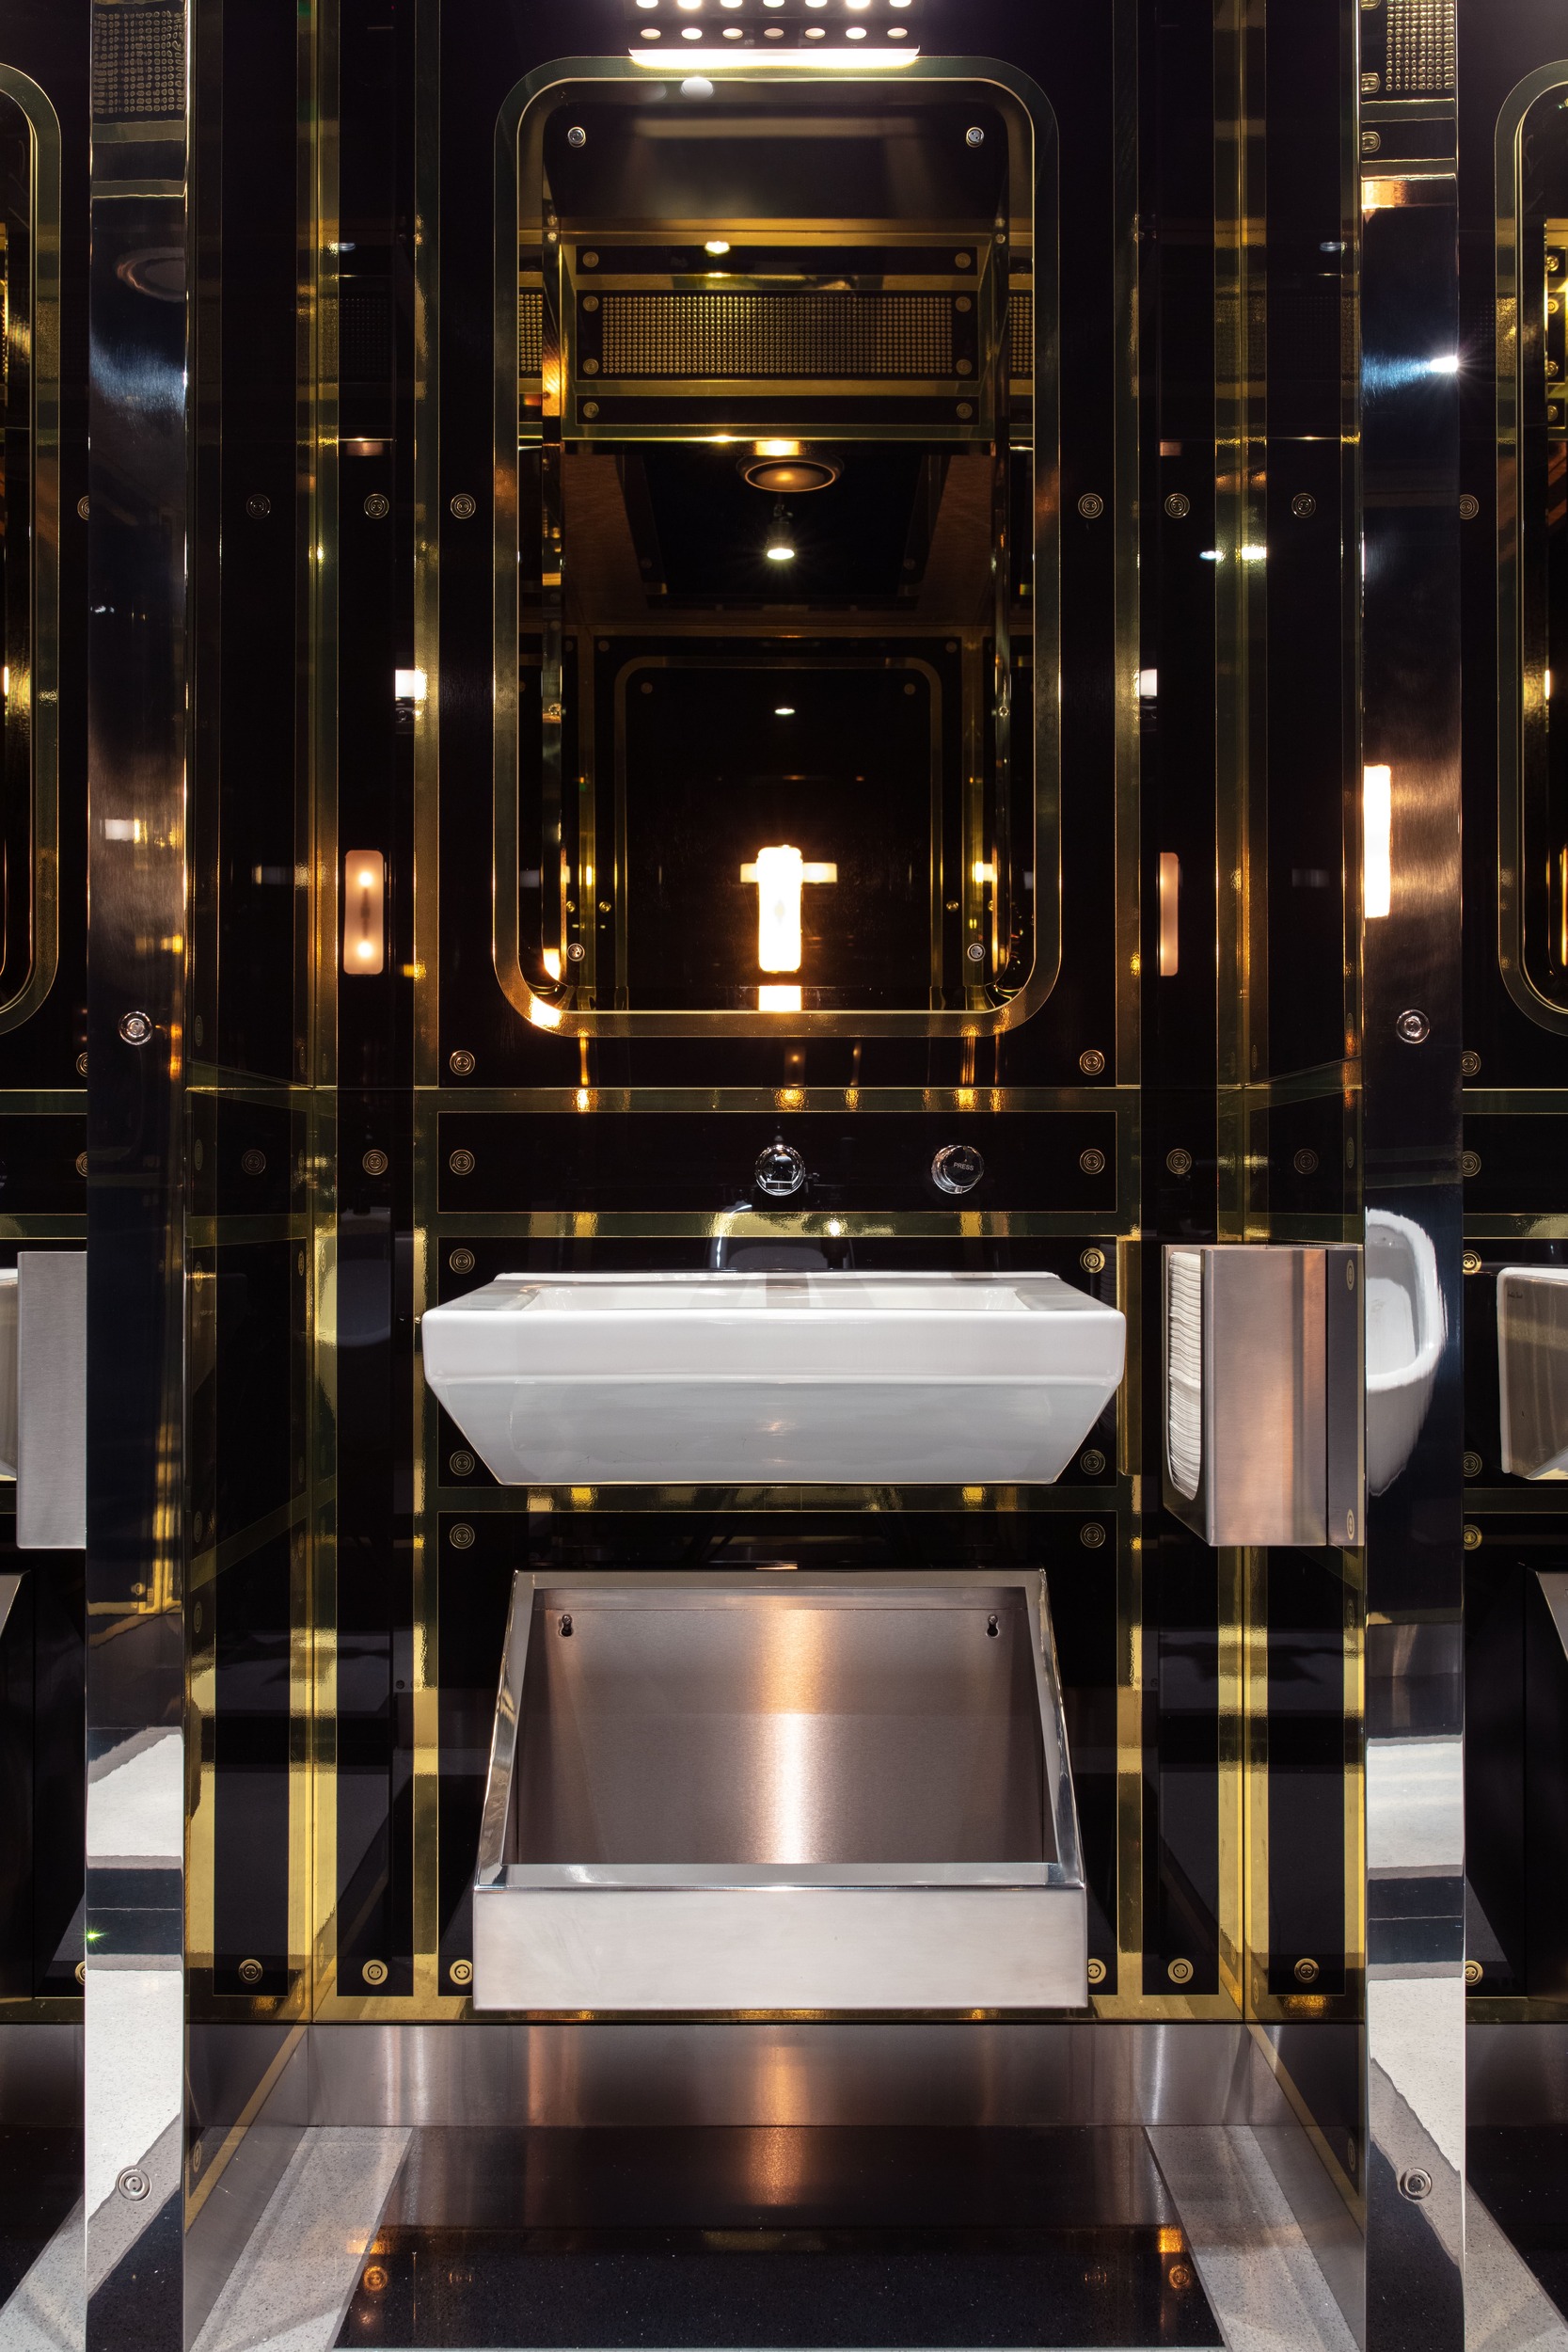 Sophisticated toilet basin with brass trim around mirror and panels